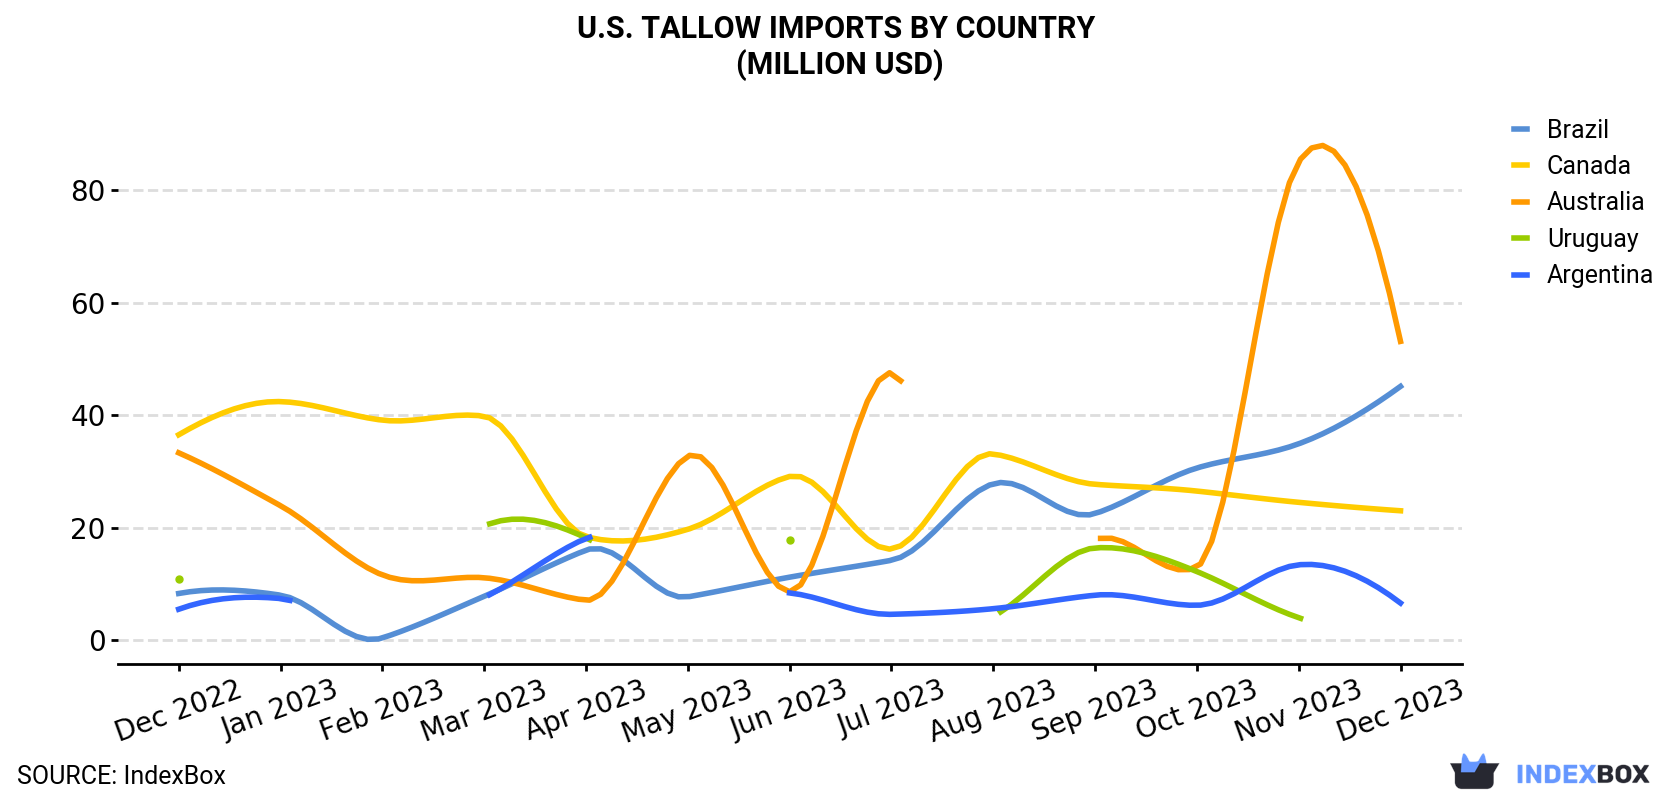 U.S. Tallow Imports By Country (Million USD)